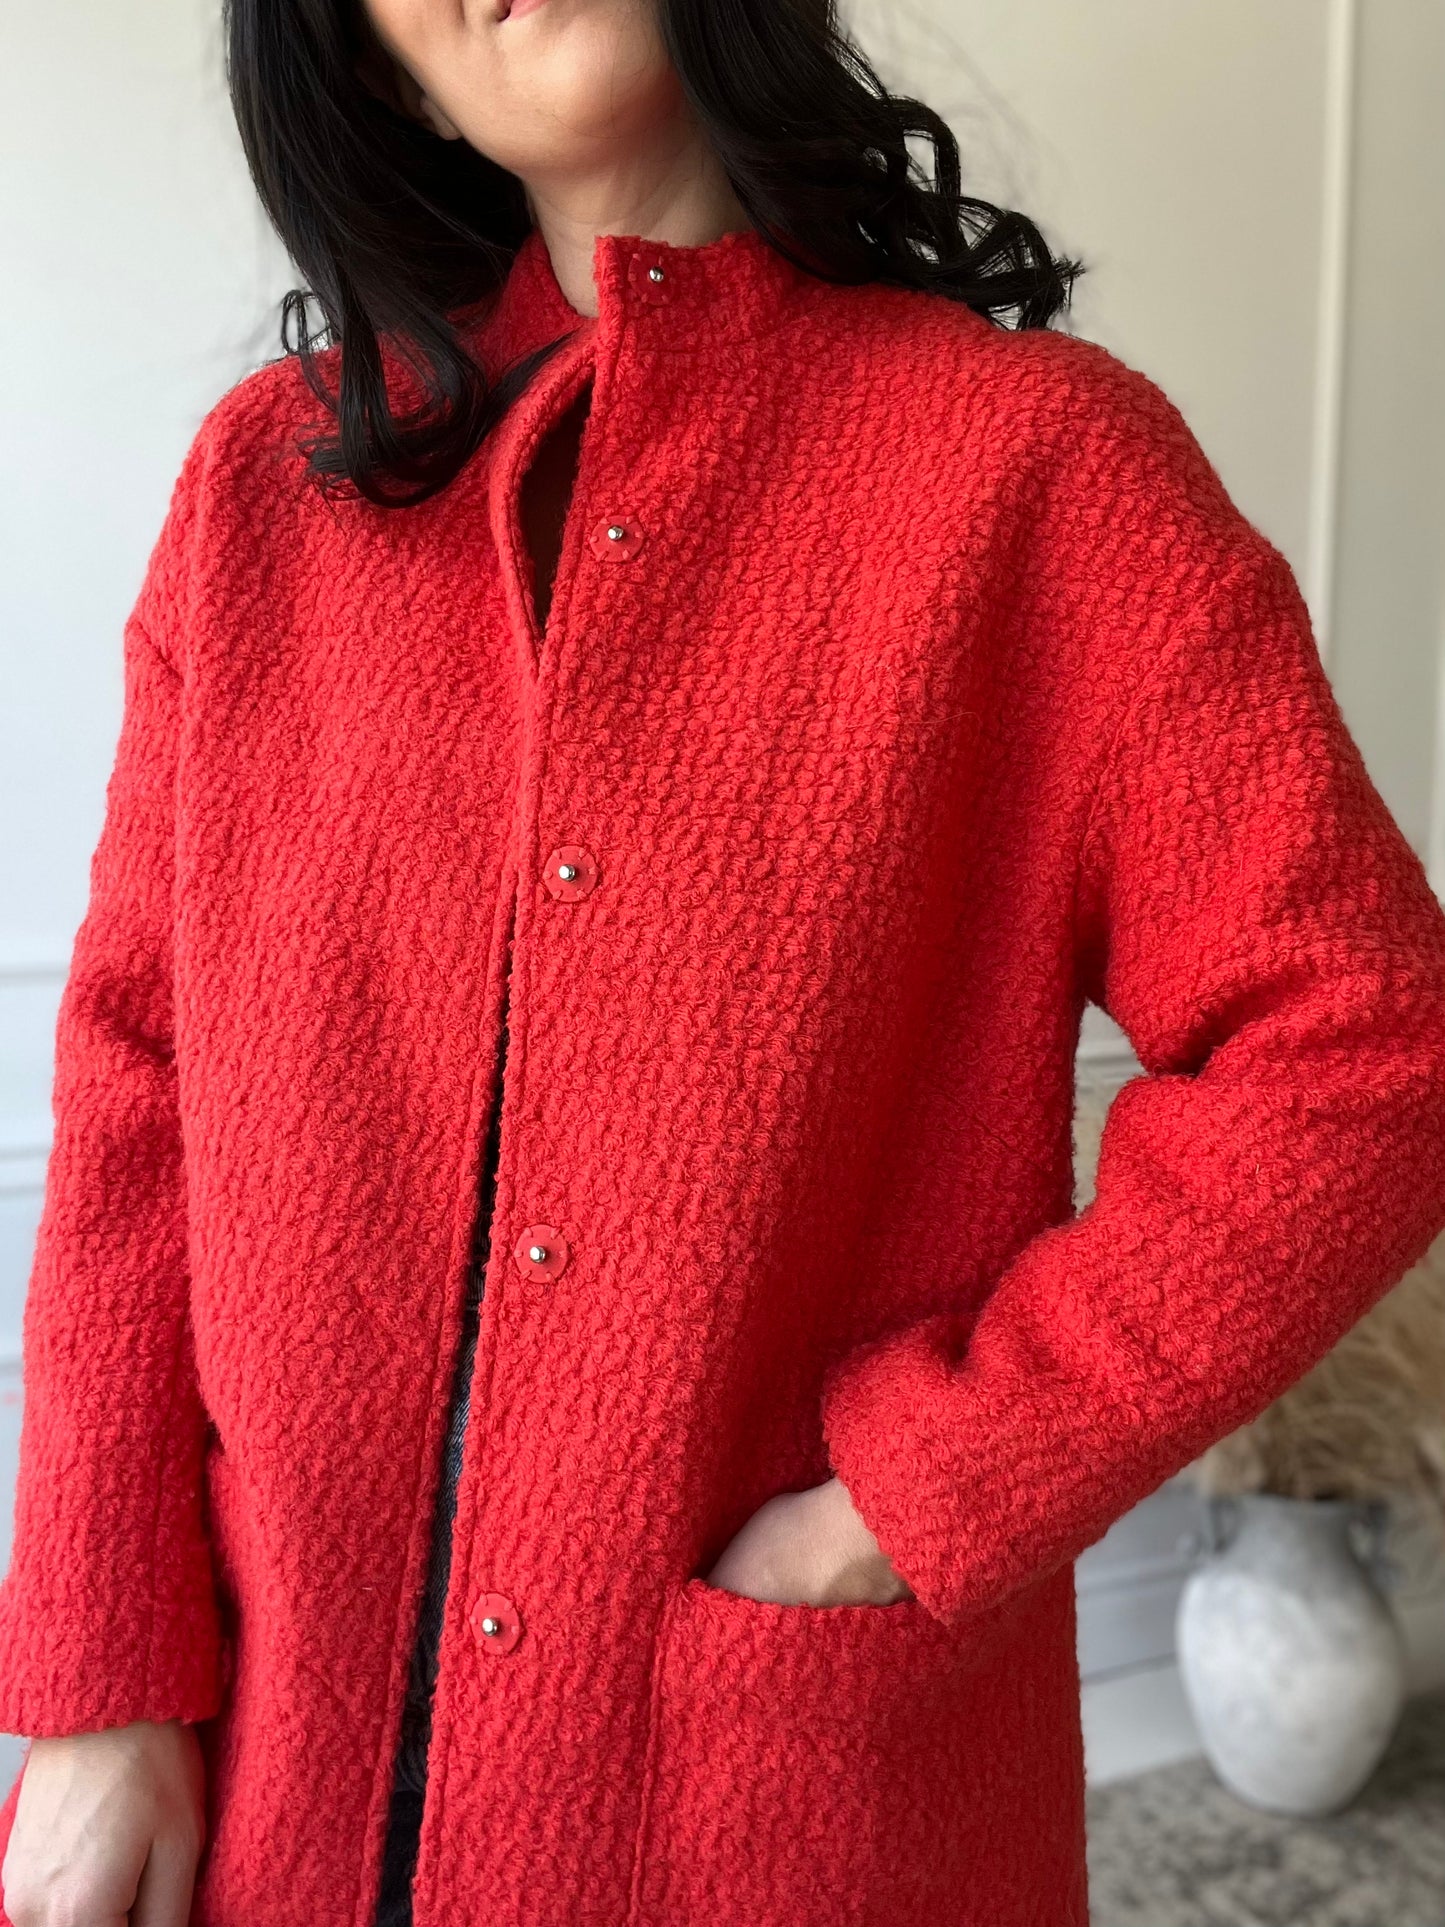 Cherry Red Texture Jacket - Size L/12